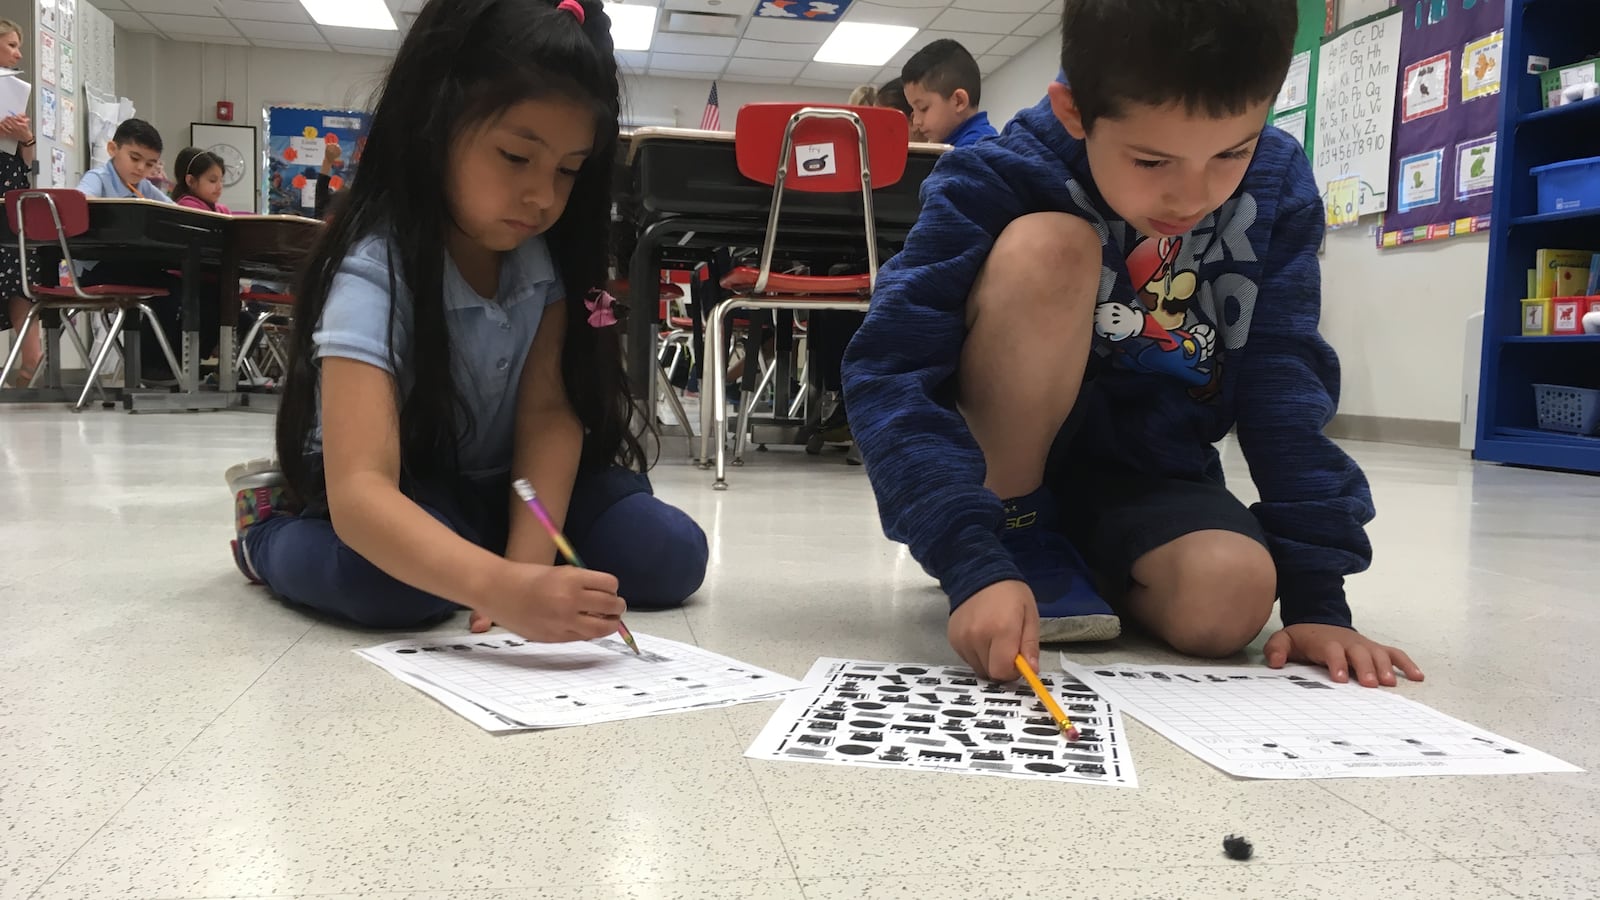 Small-group math work at Prairie Oak Elementary in Berwyn North School District 98 where, two years ago, just 14 percent of third-graders were able to do grade-level math.